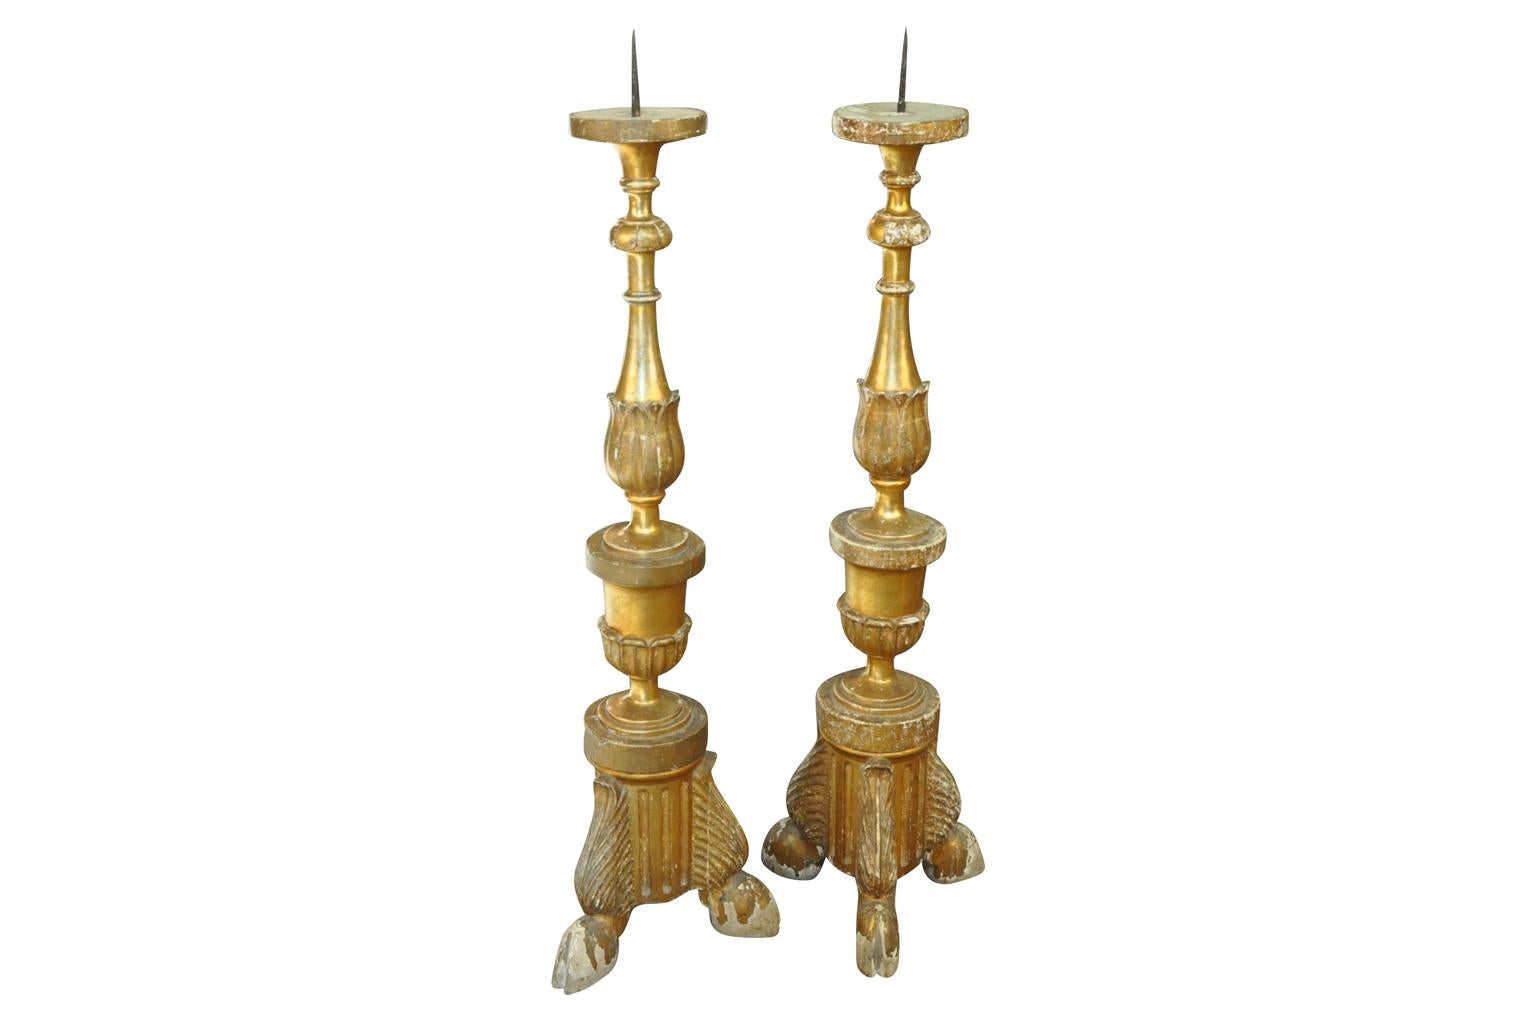 An outstanding and grand scale pair of mid-18th century Spanish pique cierge - Altar Sticks in stunning giltwood. Wonderful gold content - near pure. Stunning patina.